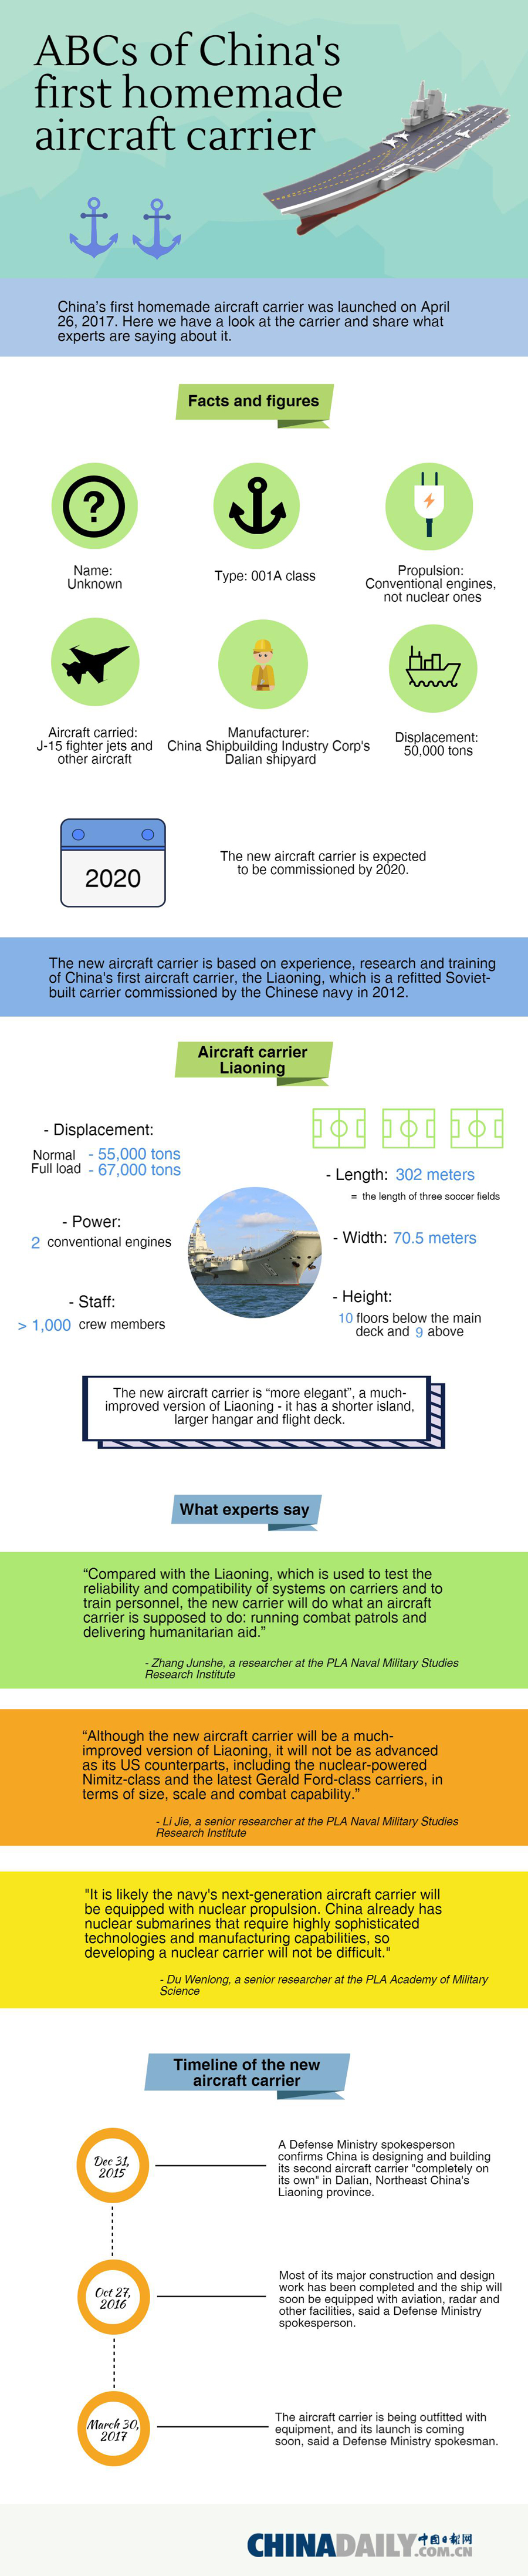 Infographic: ABCs of China's first homemade aircraft carrier